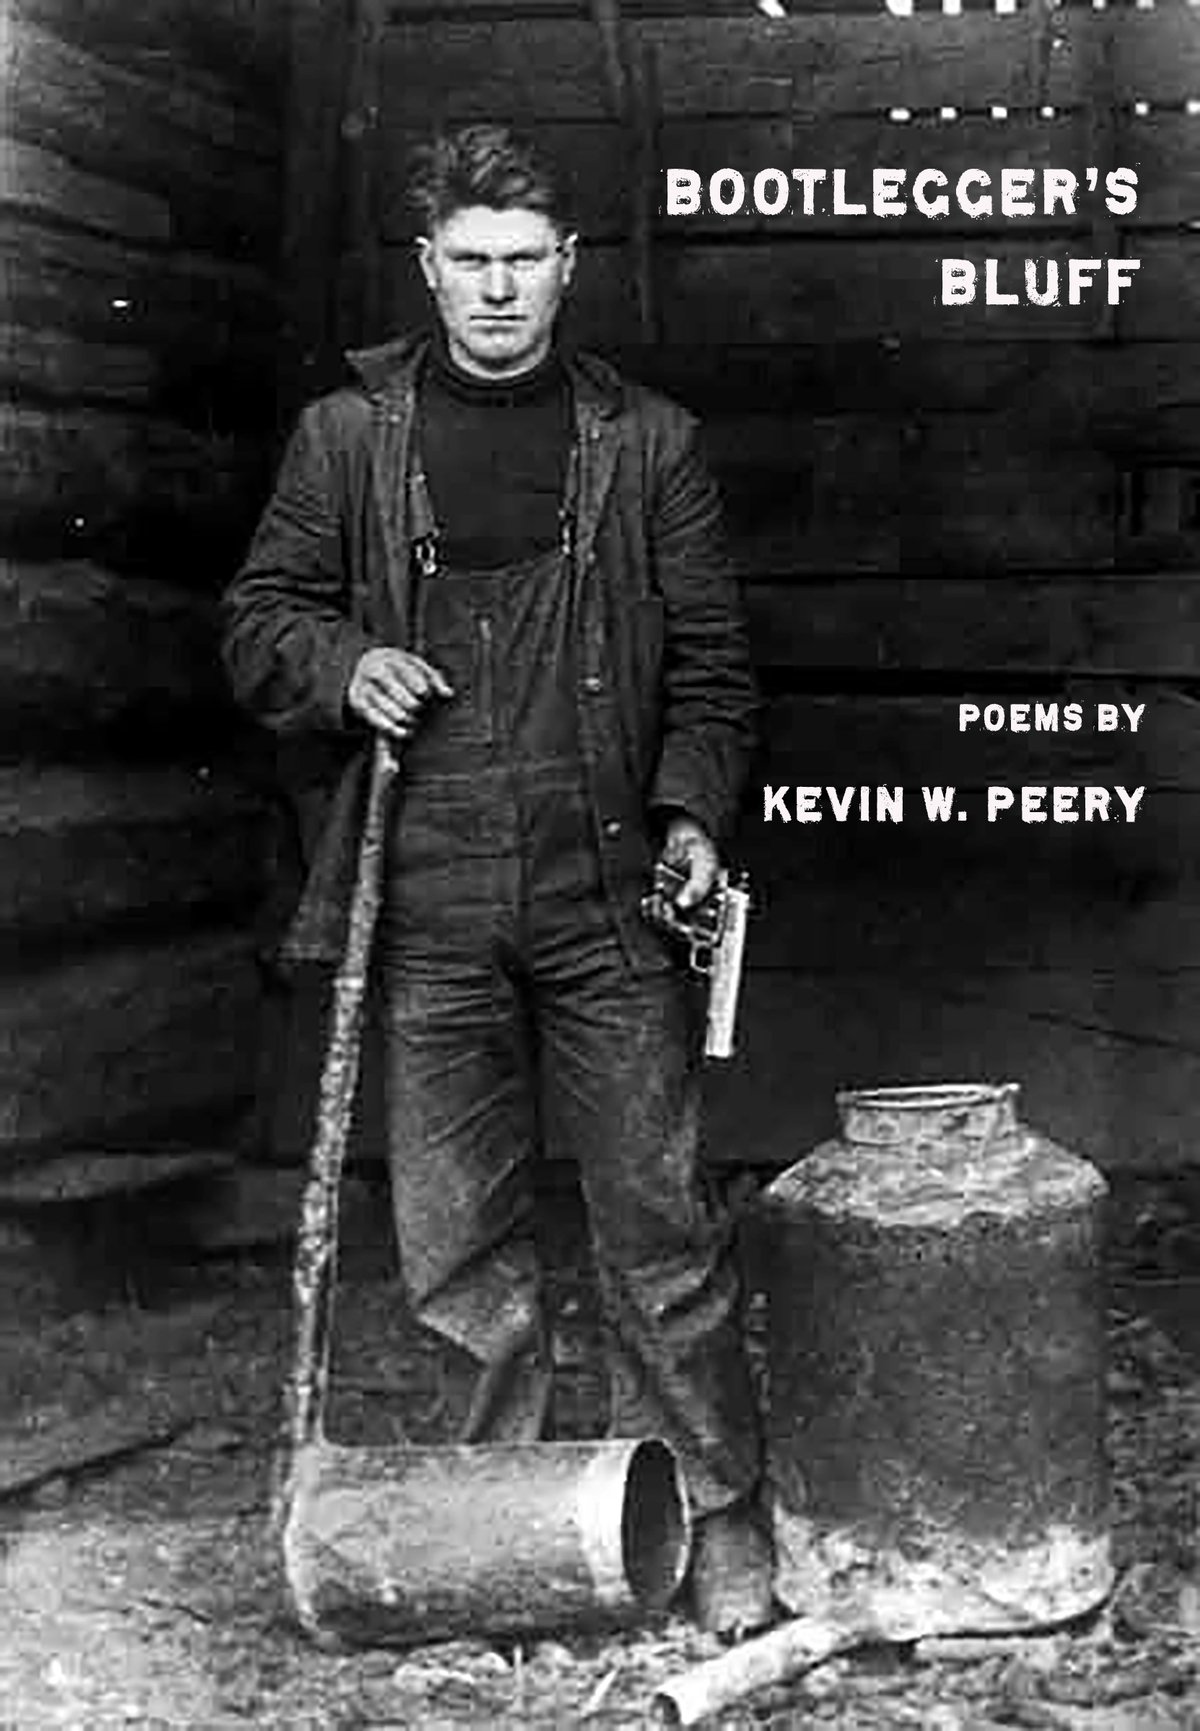 Image of Bootlegger's Bluff (1st Edition/Signed Copy)